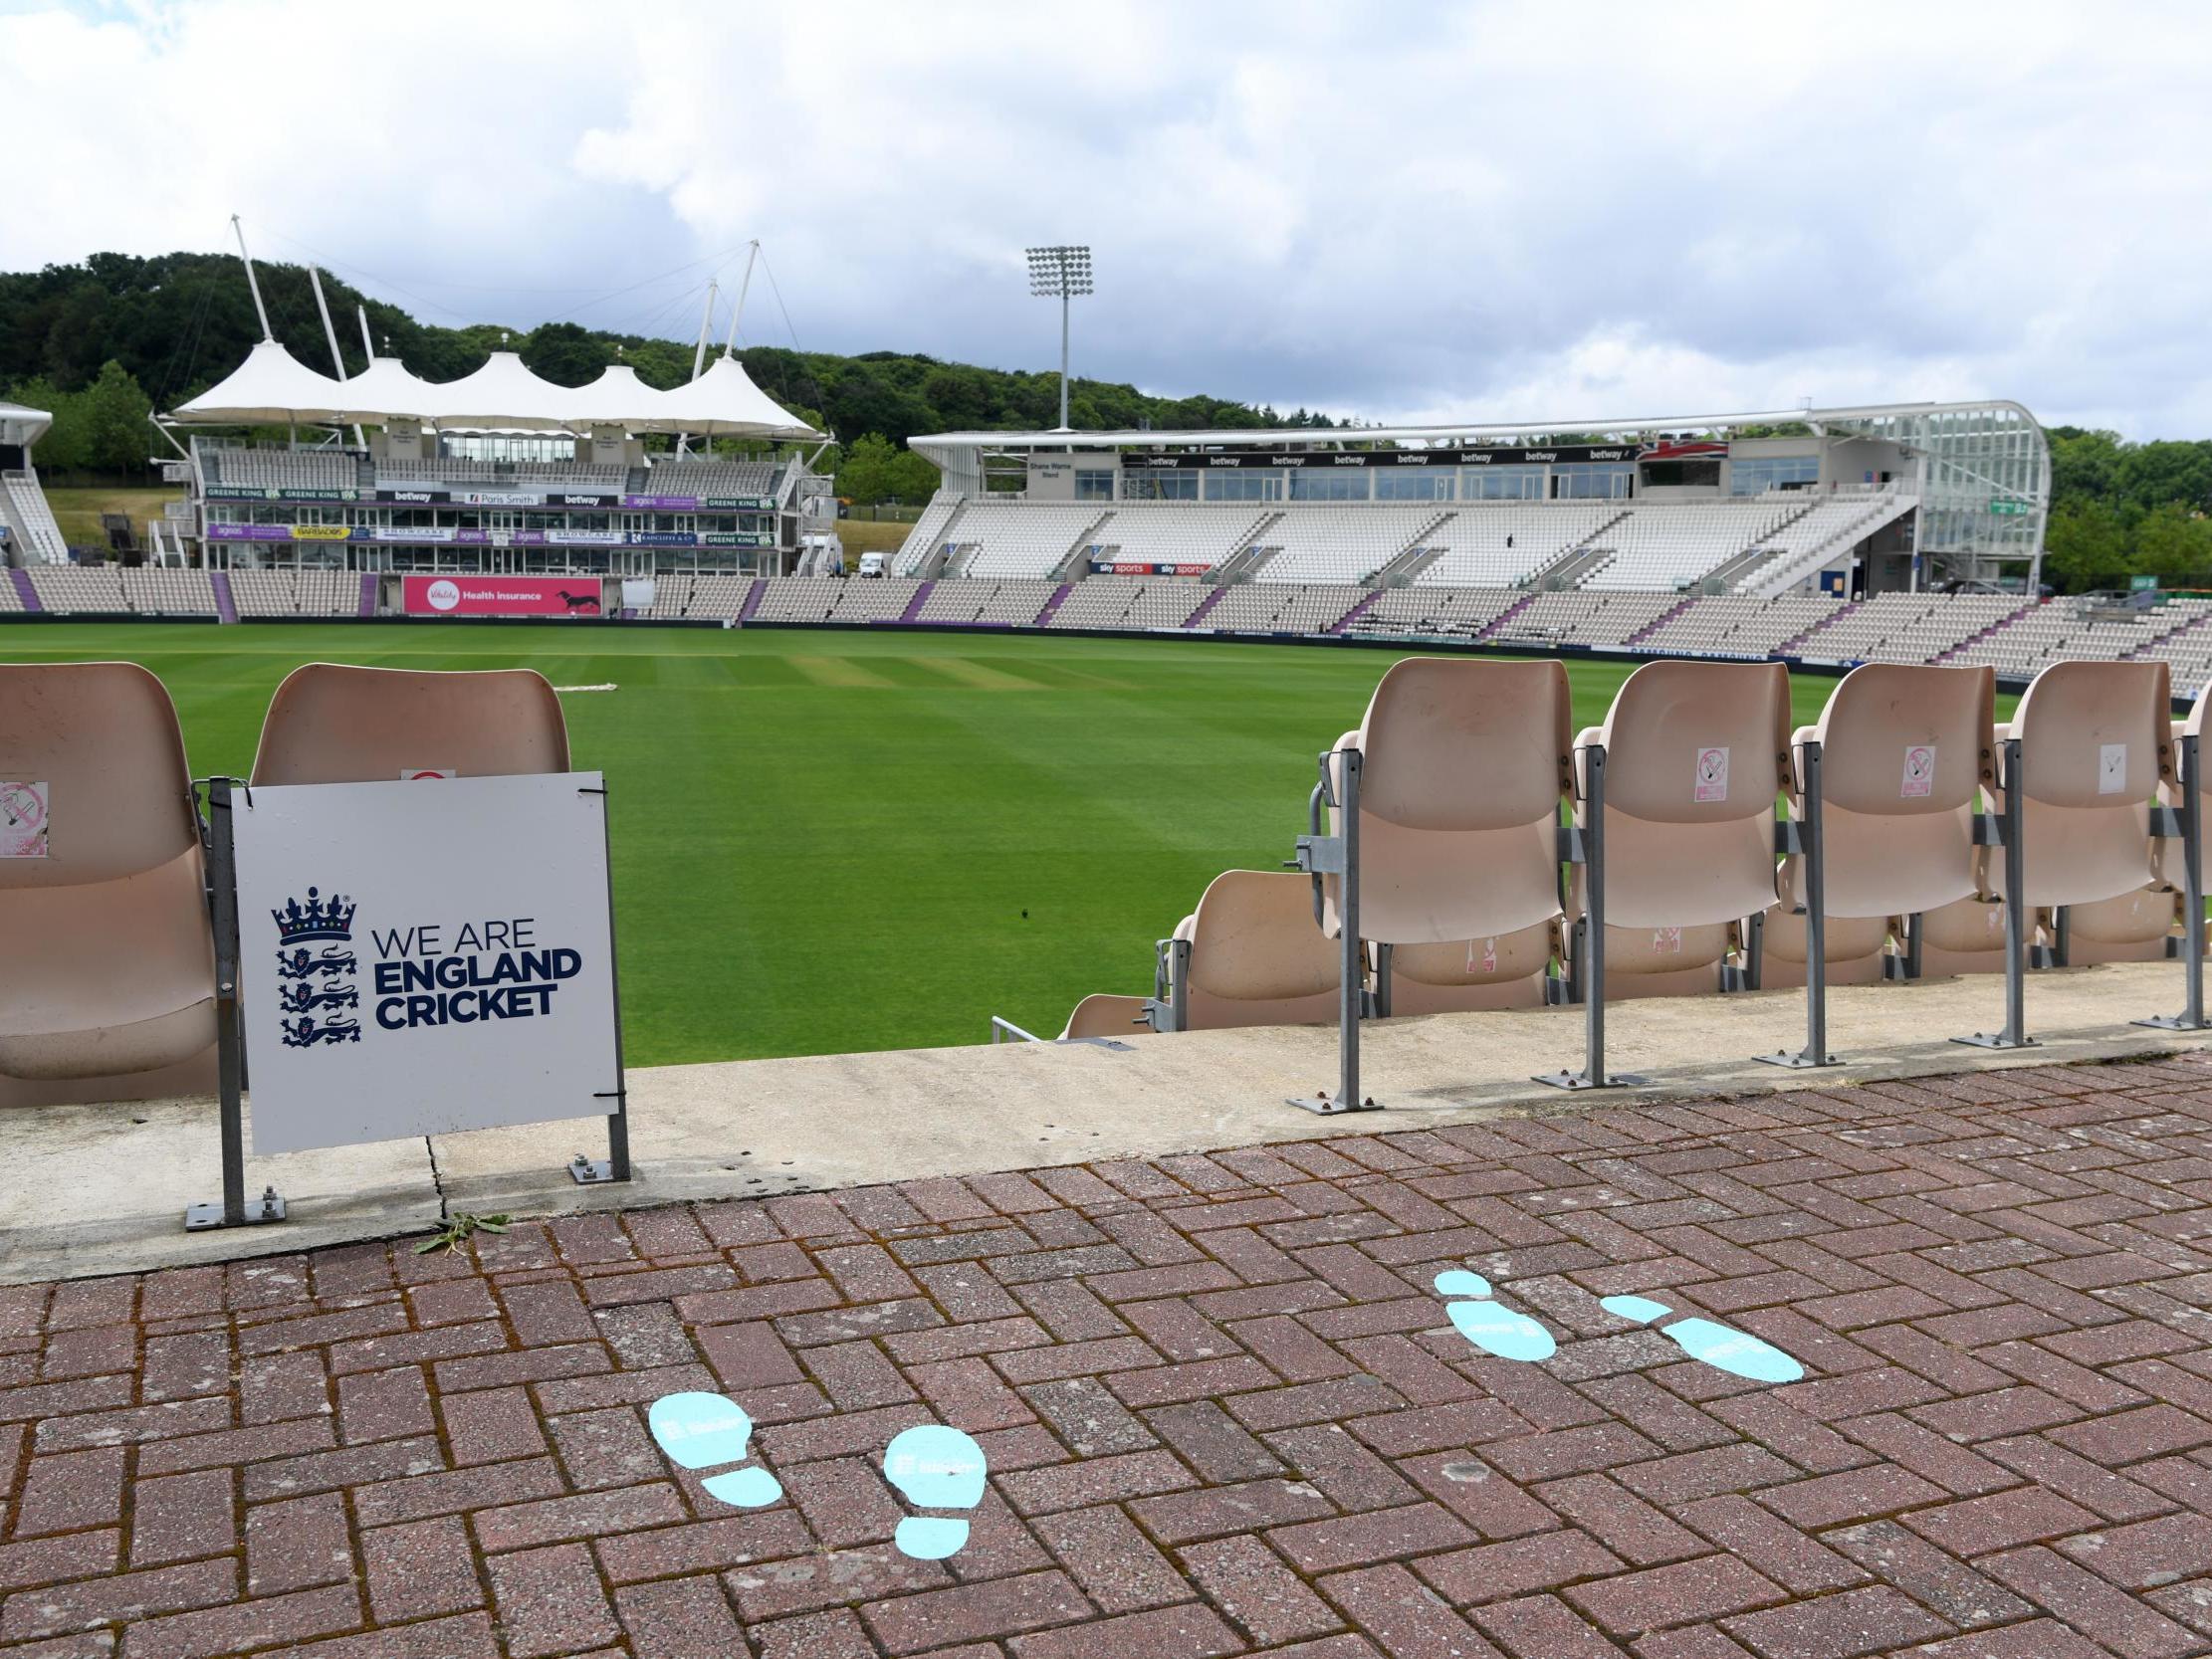 The ECB have ensured the Ageas Bowl is a bio-secure venue